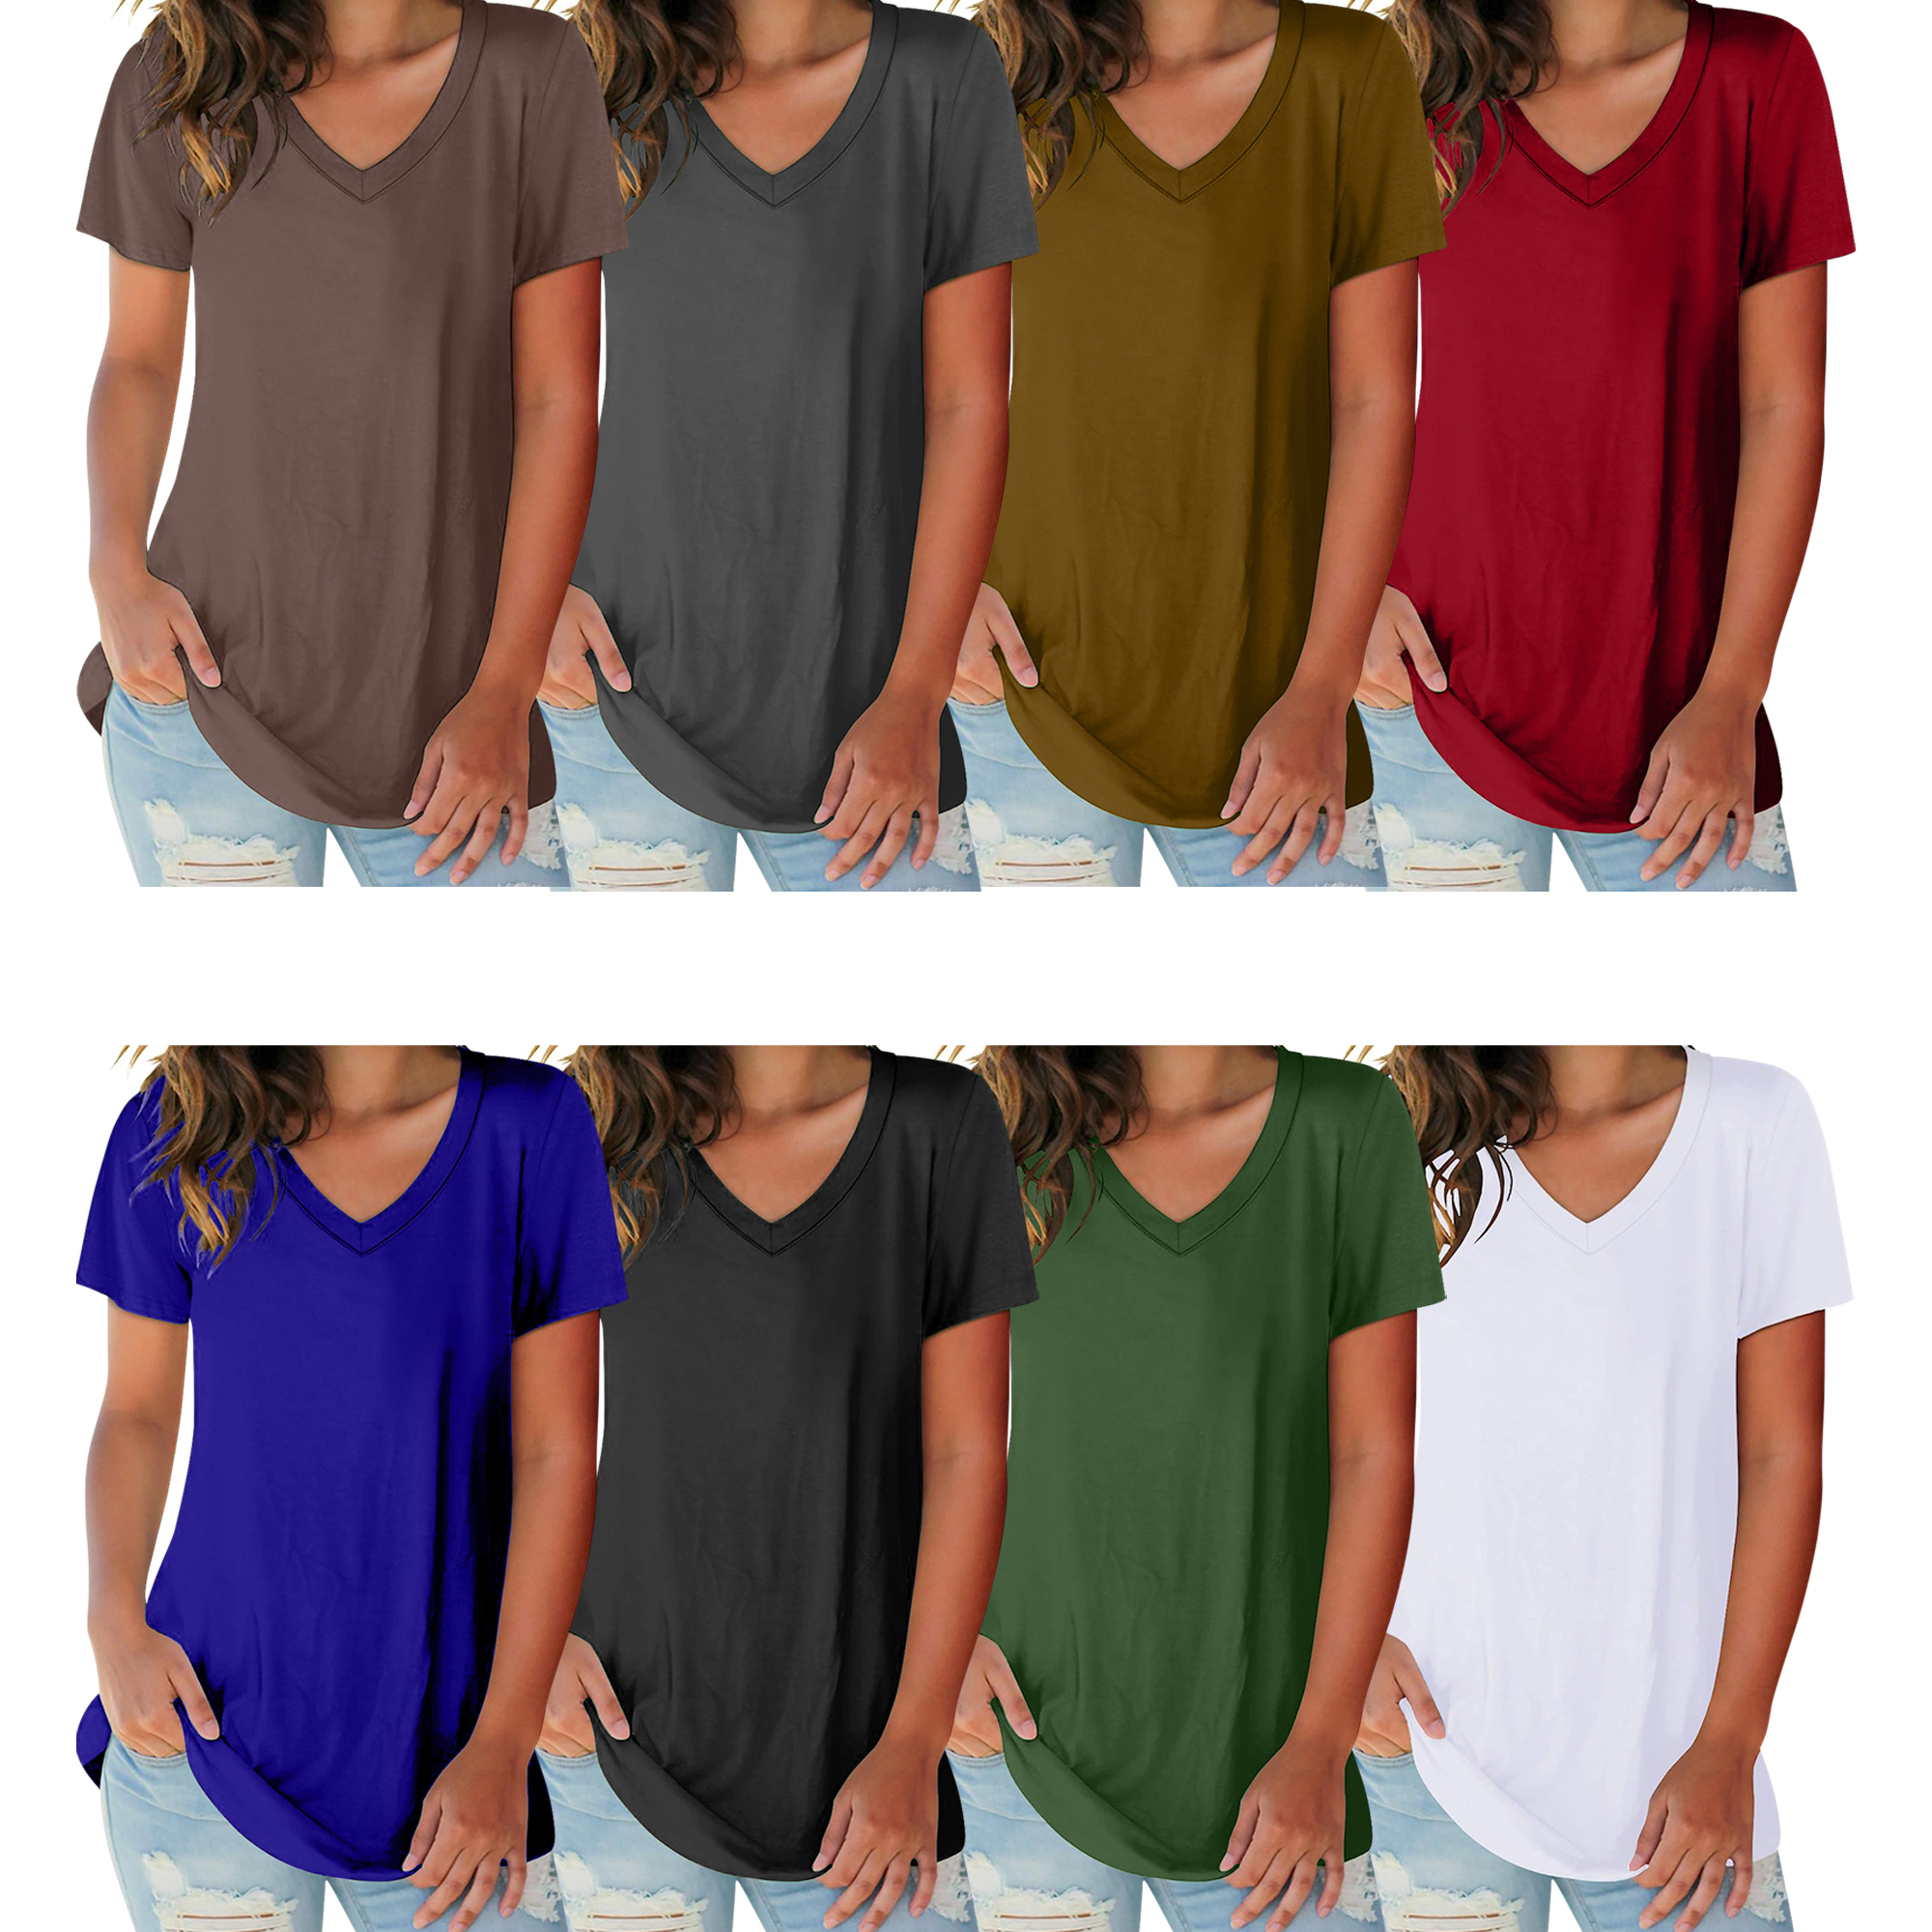 3-Pack Women's Solid V- Neck T-Shirts Soft Stretchy Athletic Moisture-Wicking Running Workout Yoga Tee Tops - S